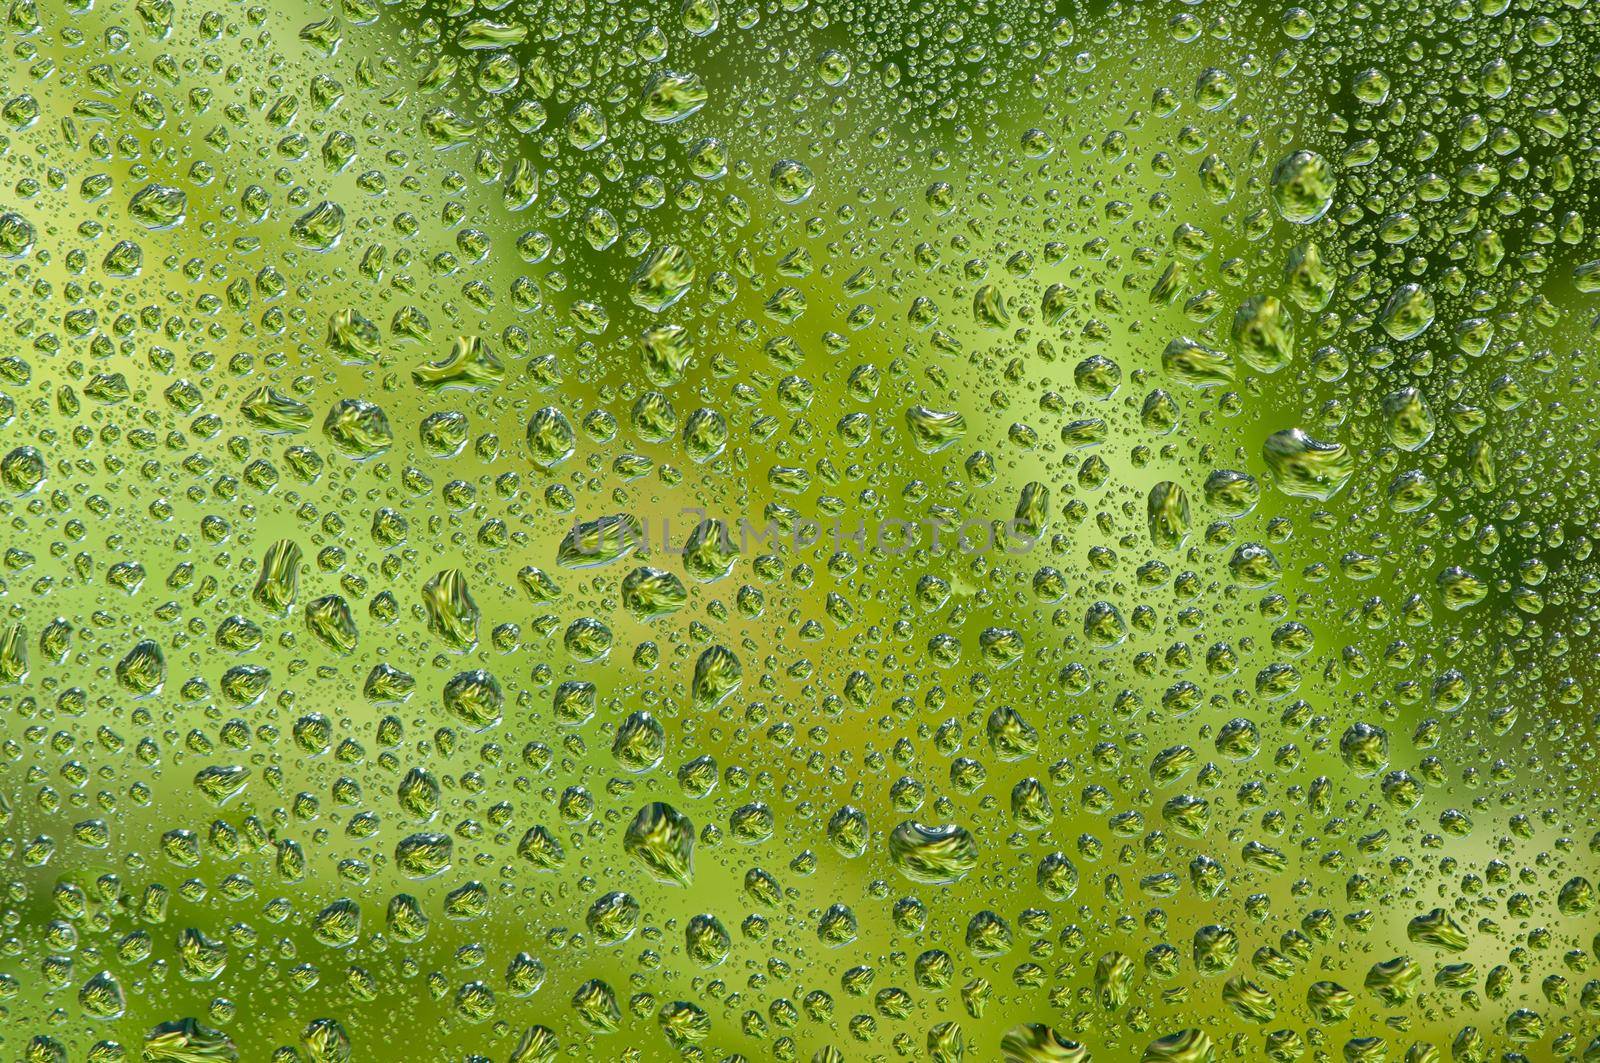 Water drop on glass window with green tree background. by thanumporn